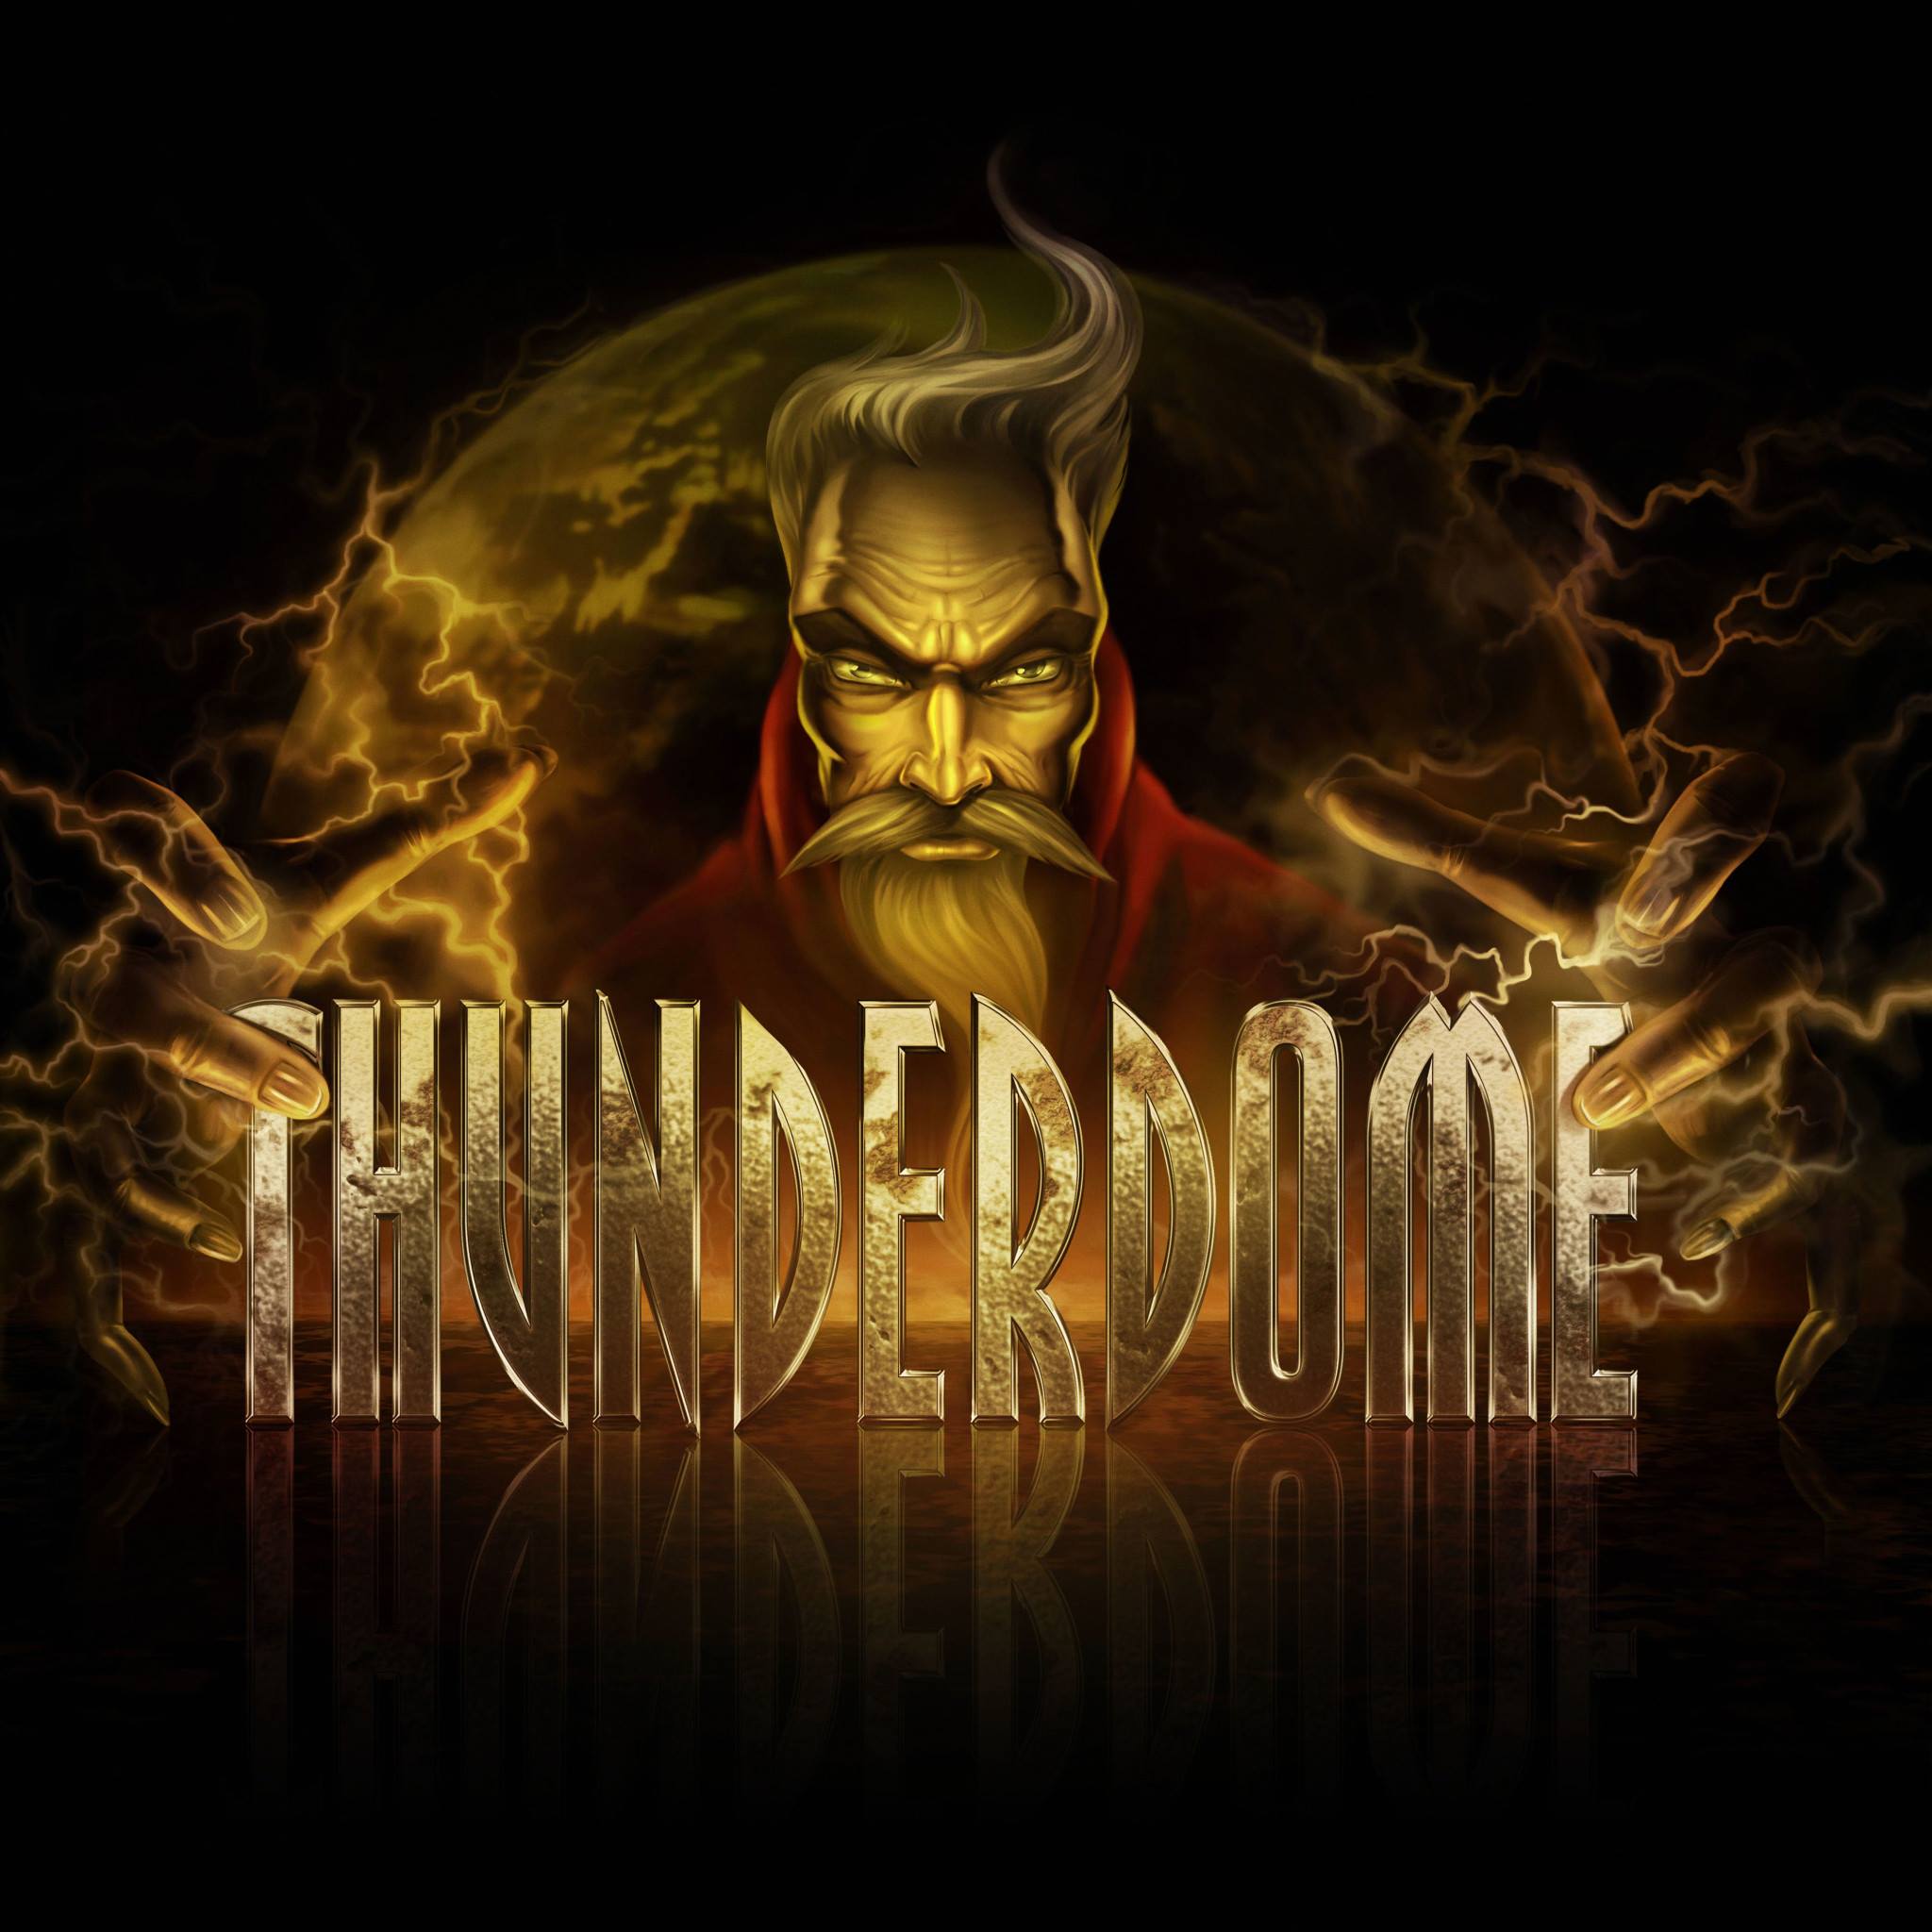 thuderdome hardcore rules the world